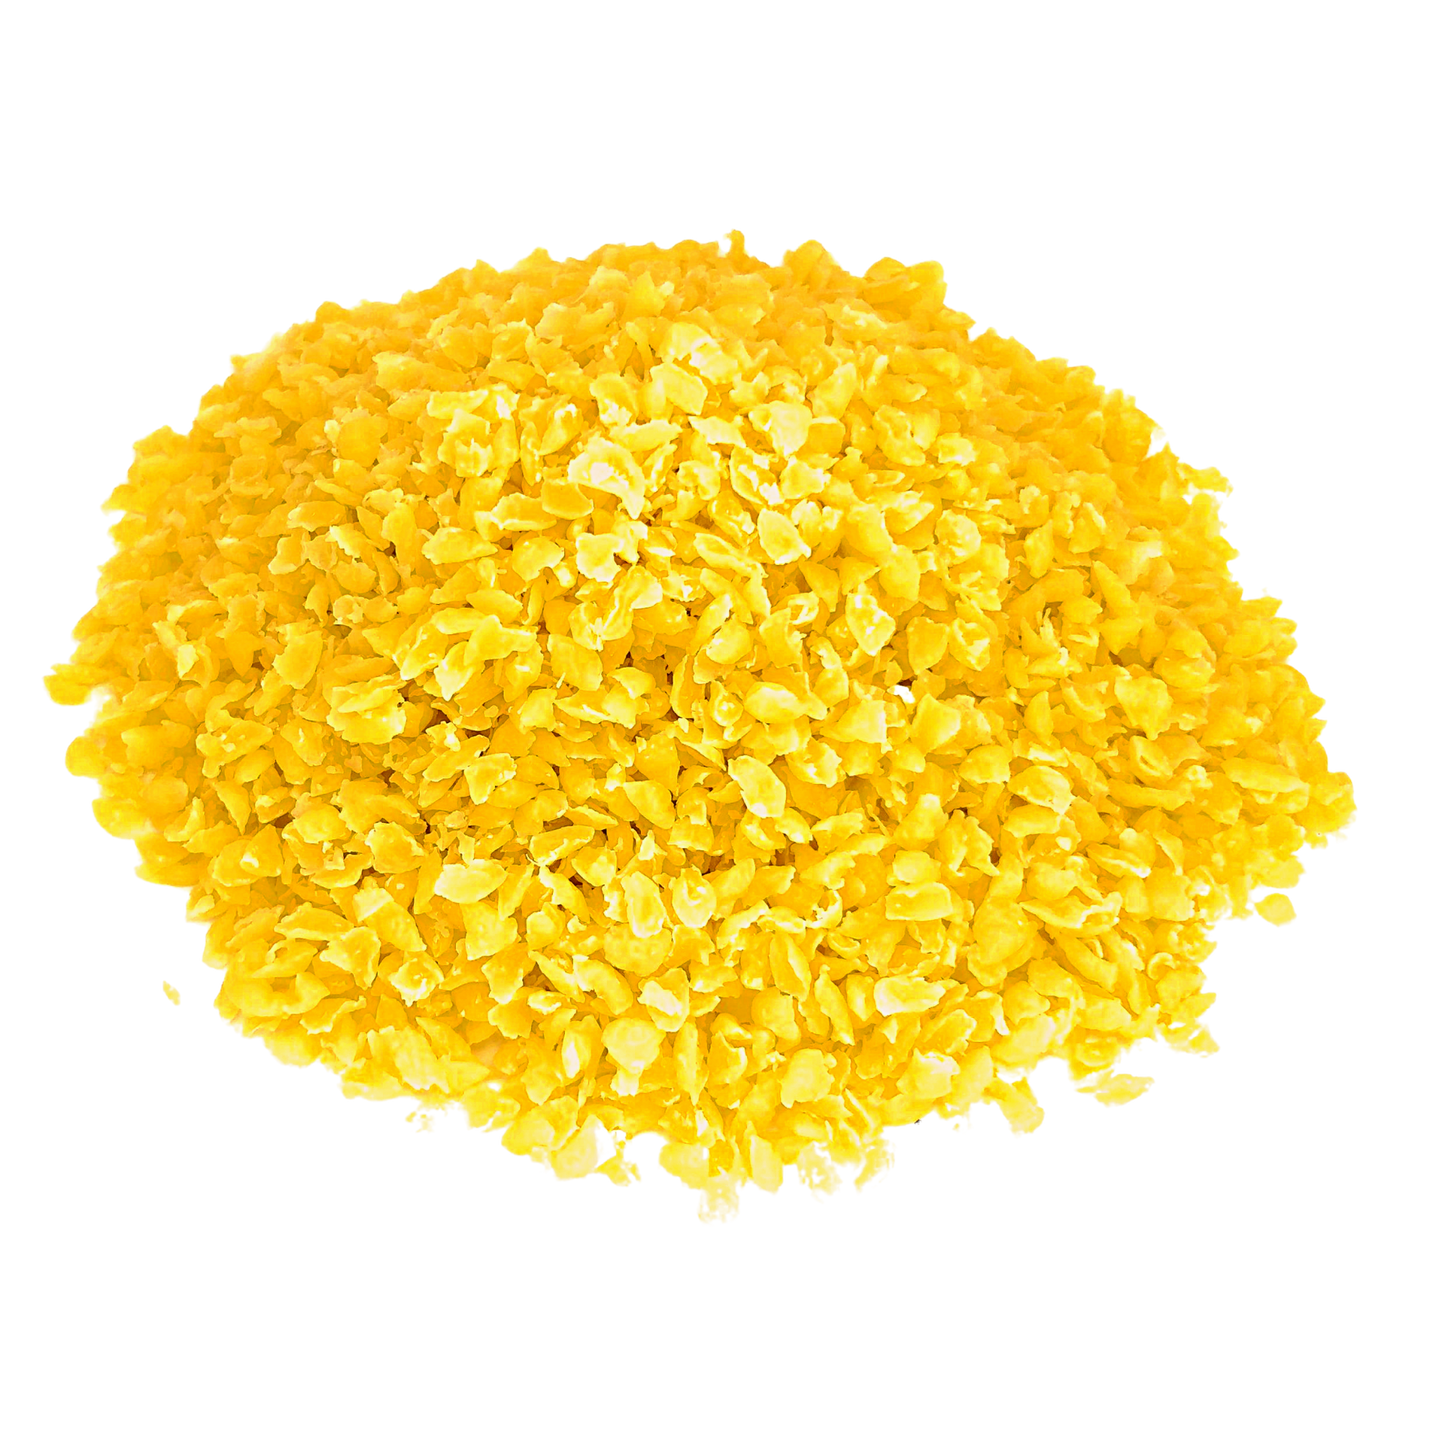  5LB Beeswax Pellets Beeswax for Candle Making Beeswax